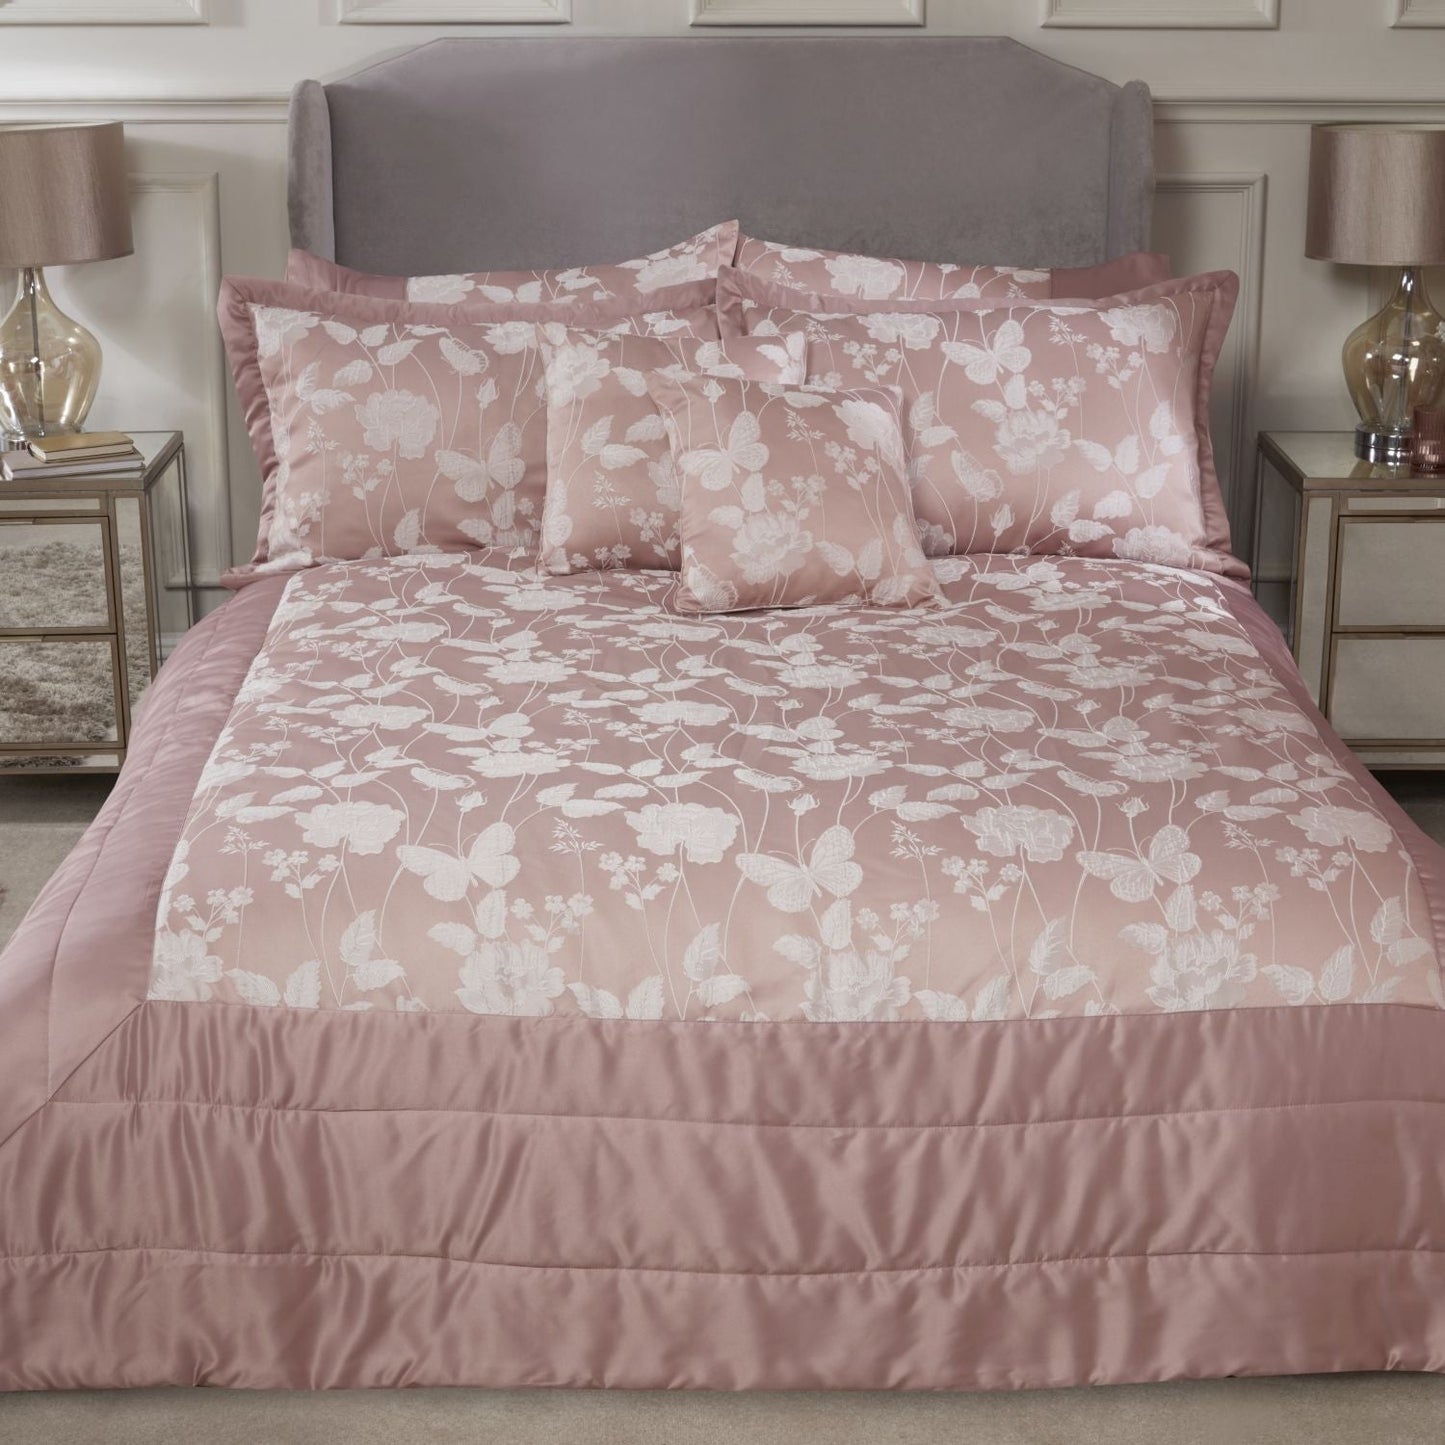 Butterfly Meadow Blush Pink Embellished Jacquard Quilted Bedspread Set